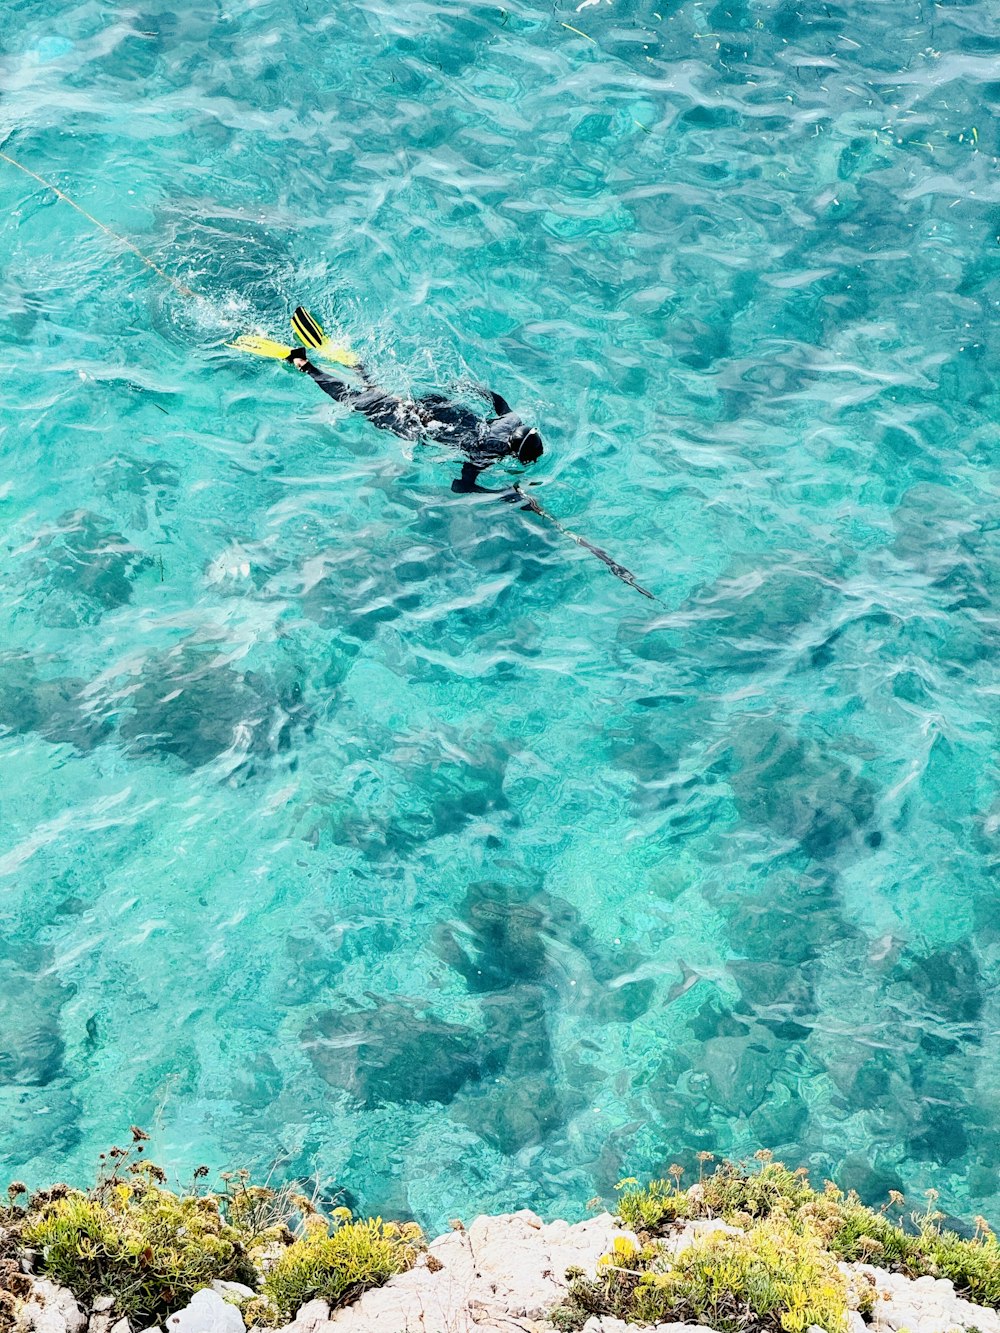 a person in a wet suit swimming in clear blue water